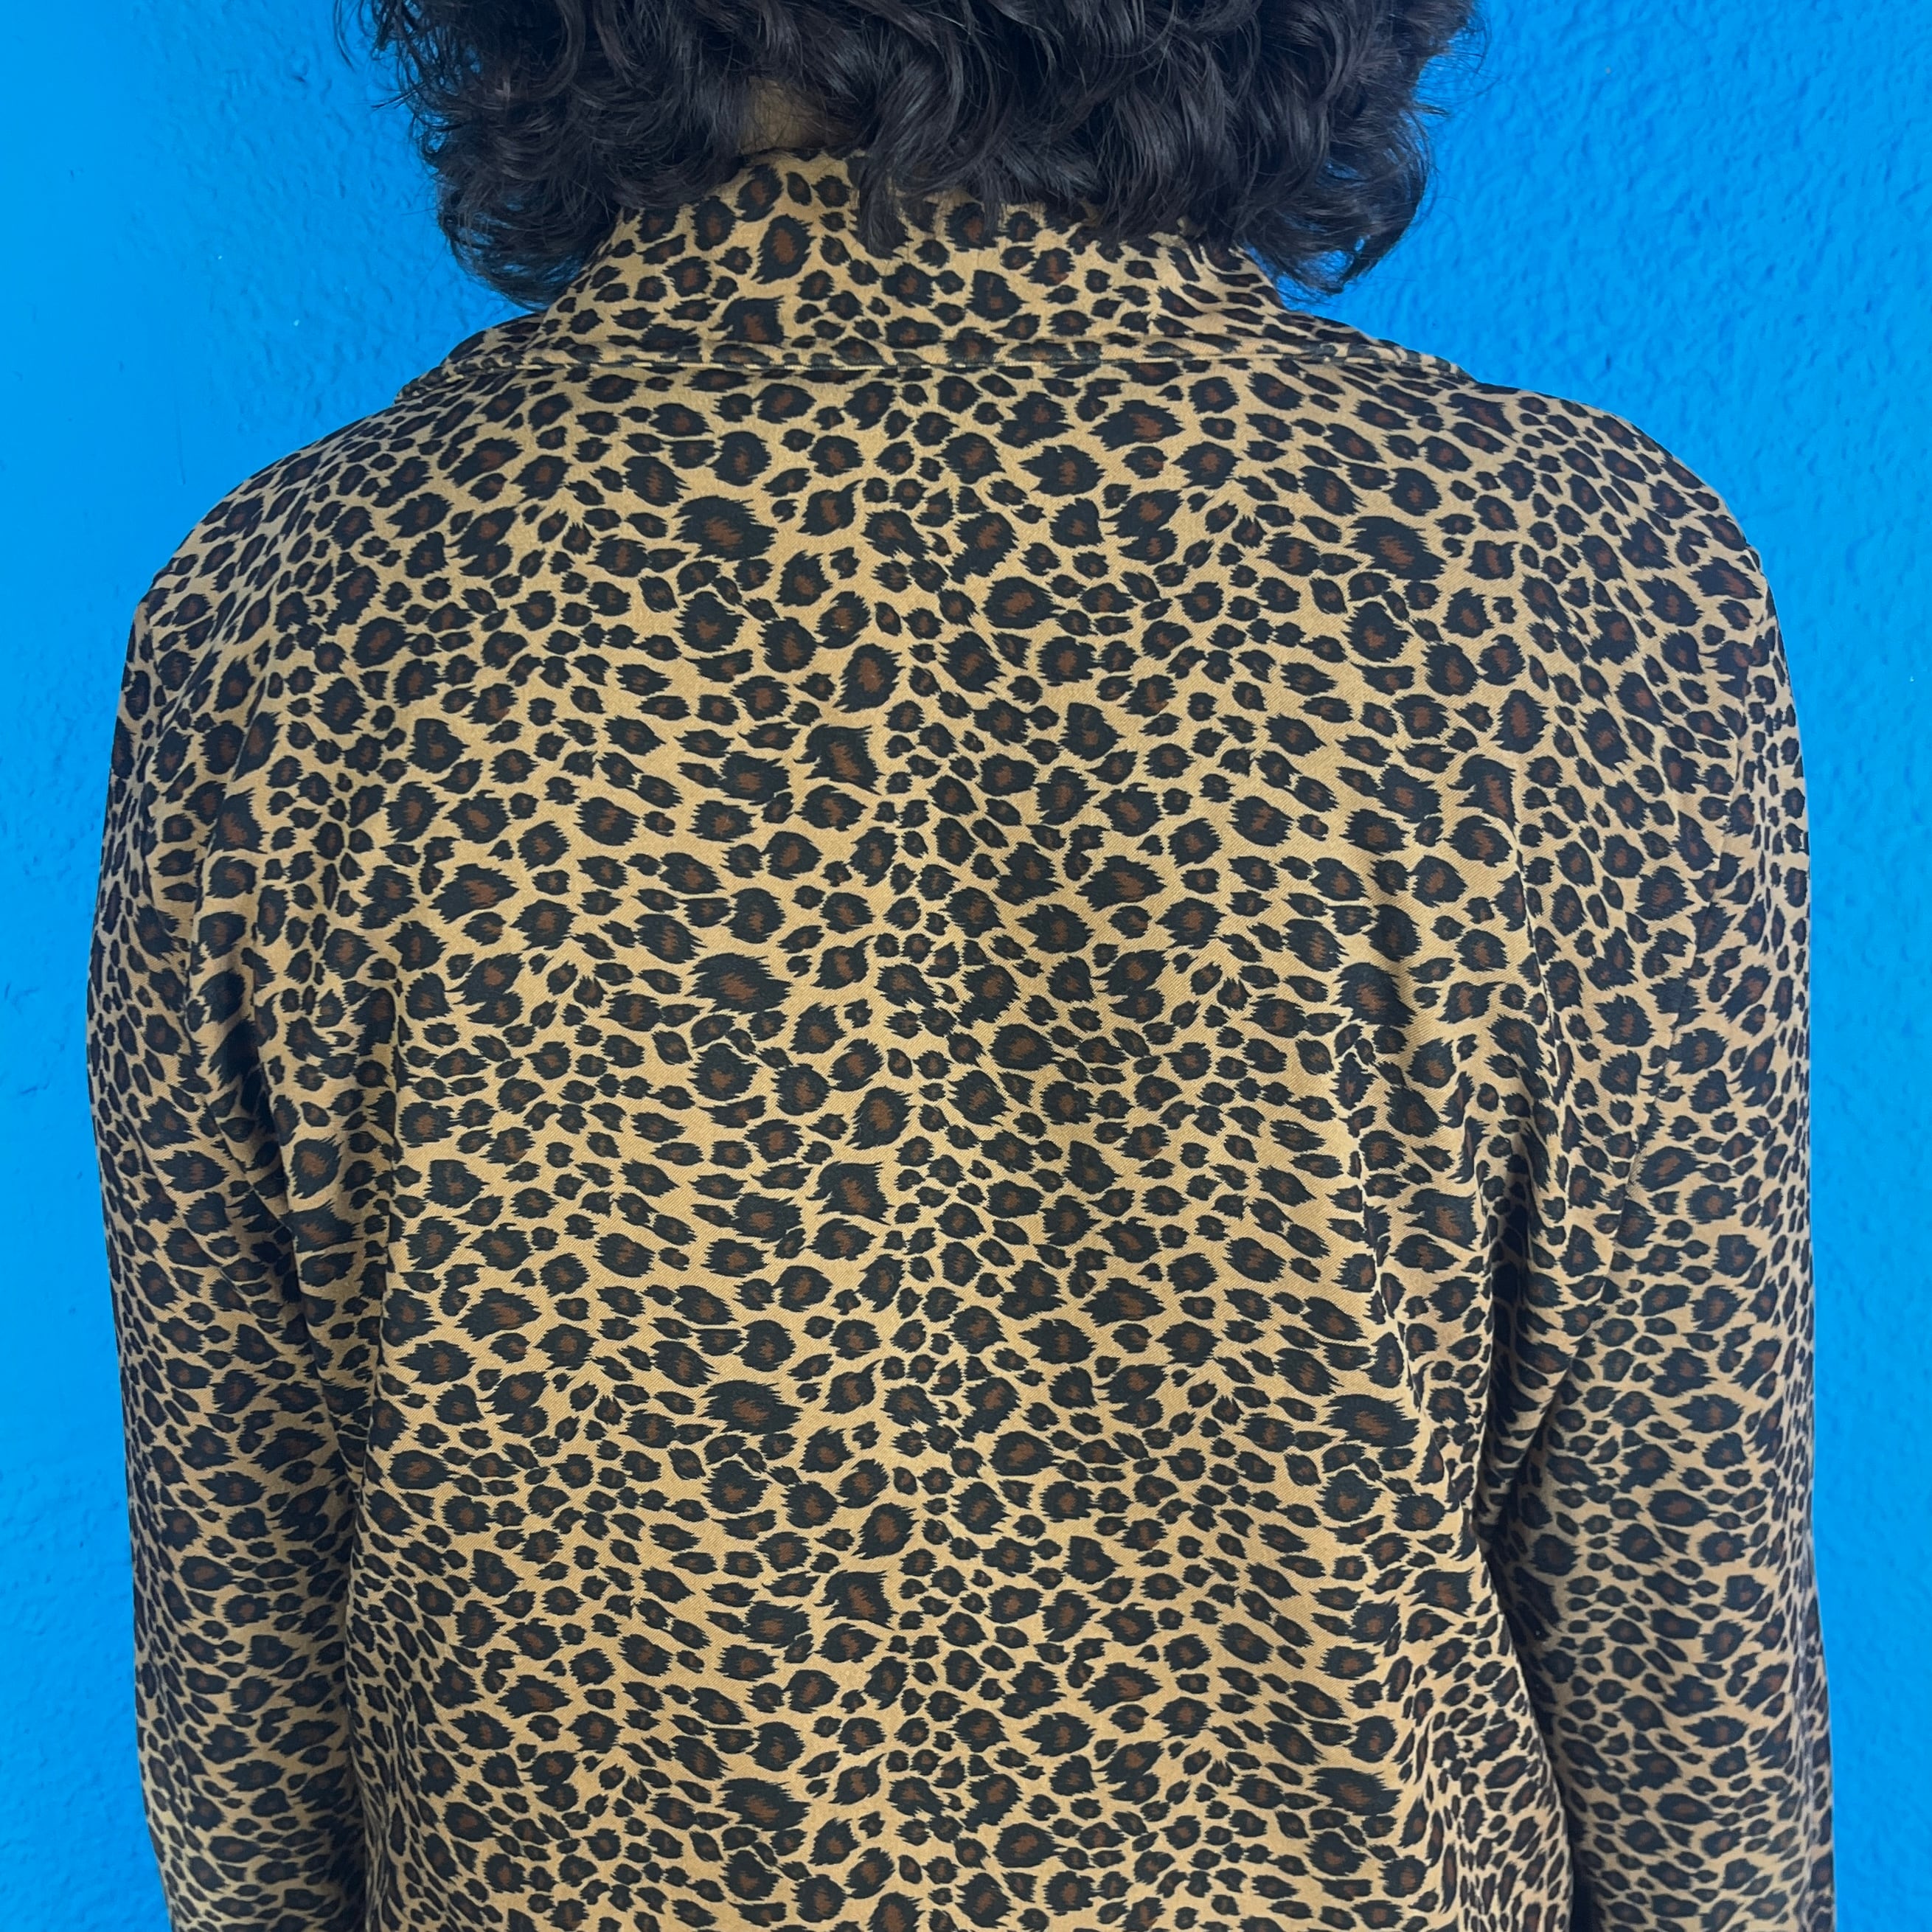 【Lady's】 90s Leopard Print Jacket / Made In USA レオパード ヒョウ柄 テーラード ジャケット  Vintage ヴィンテージ